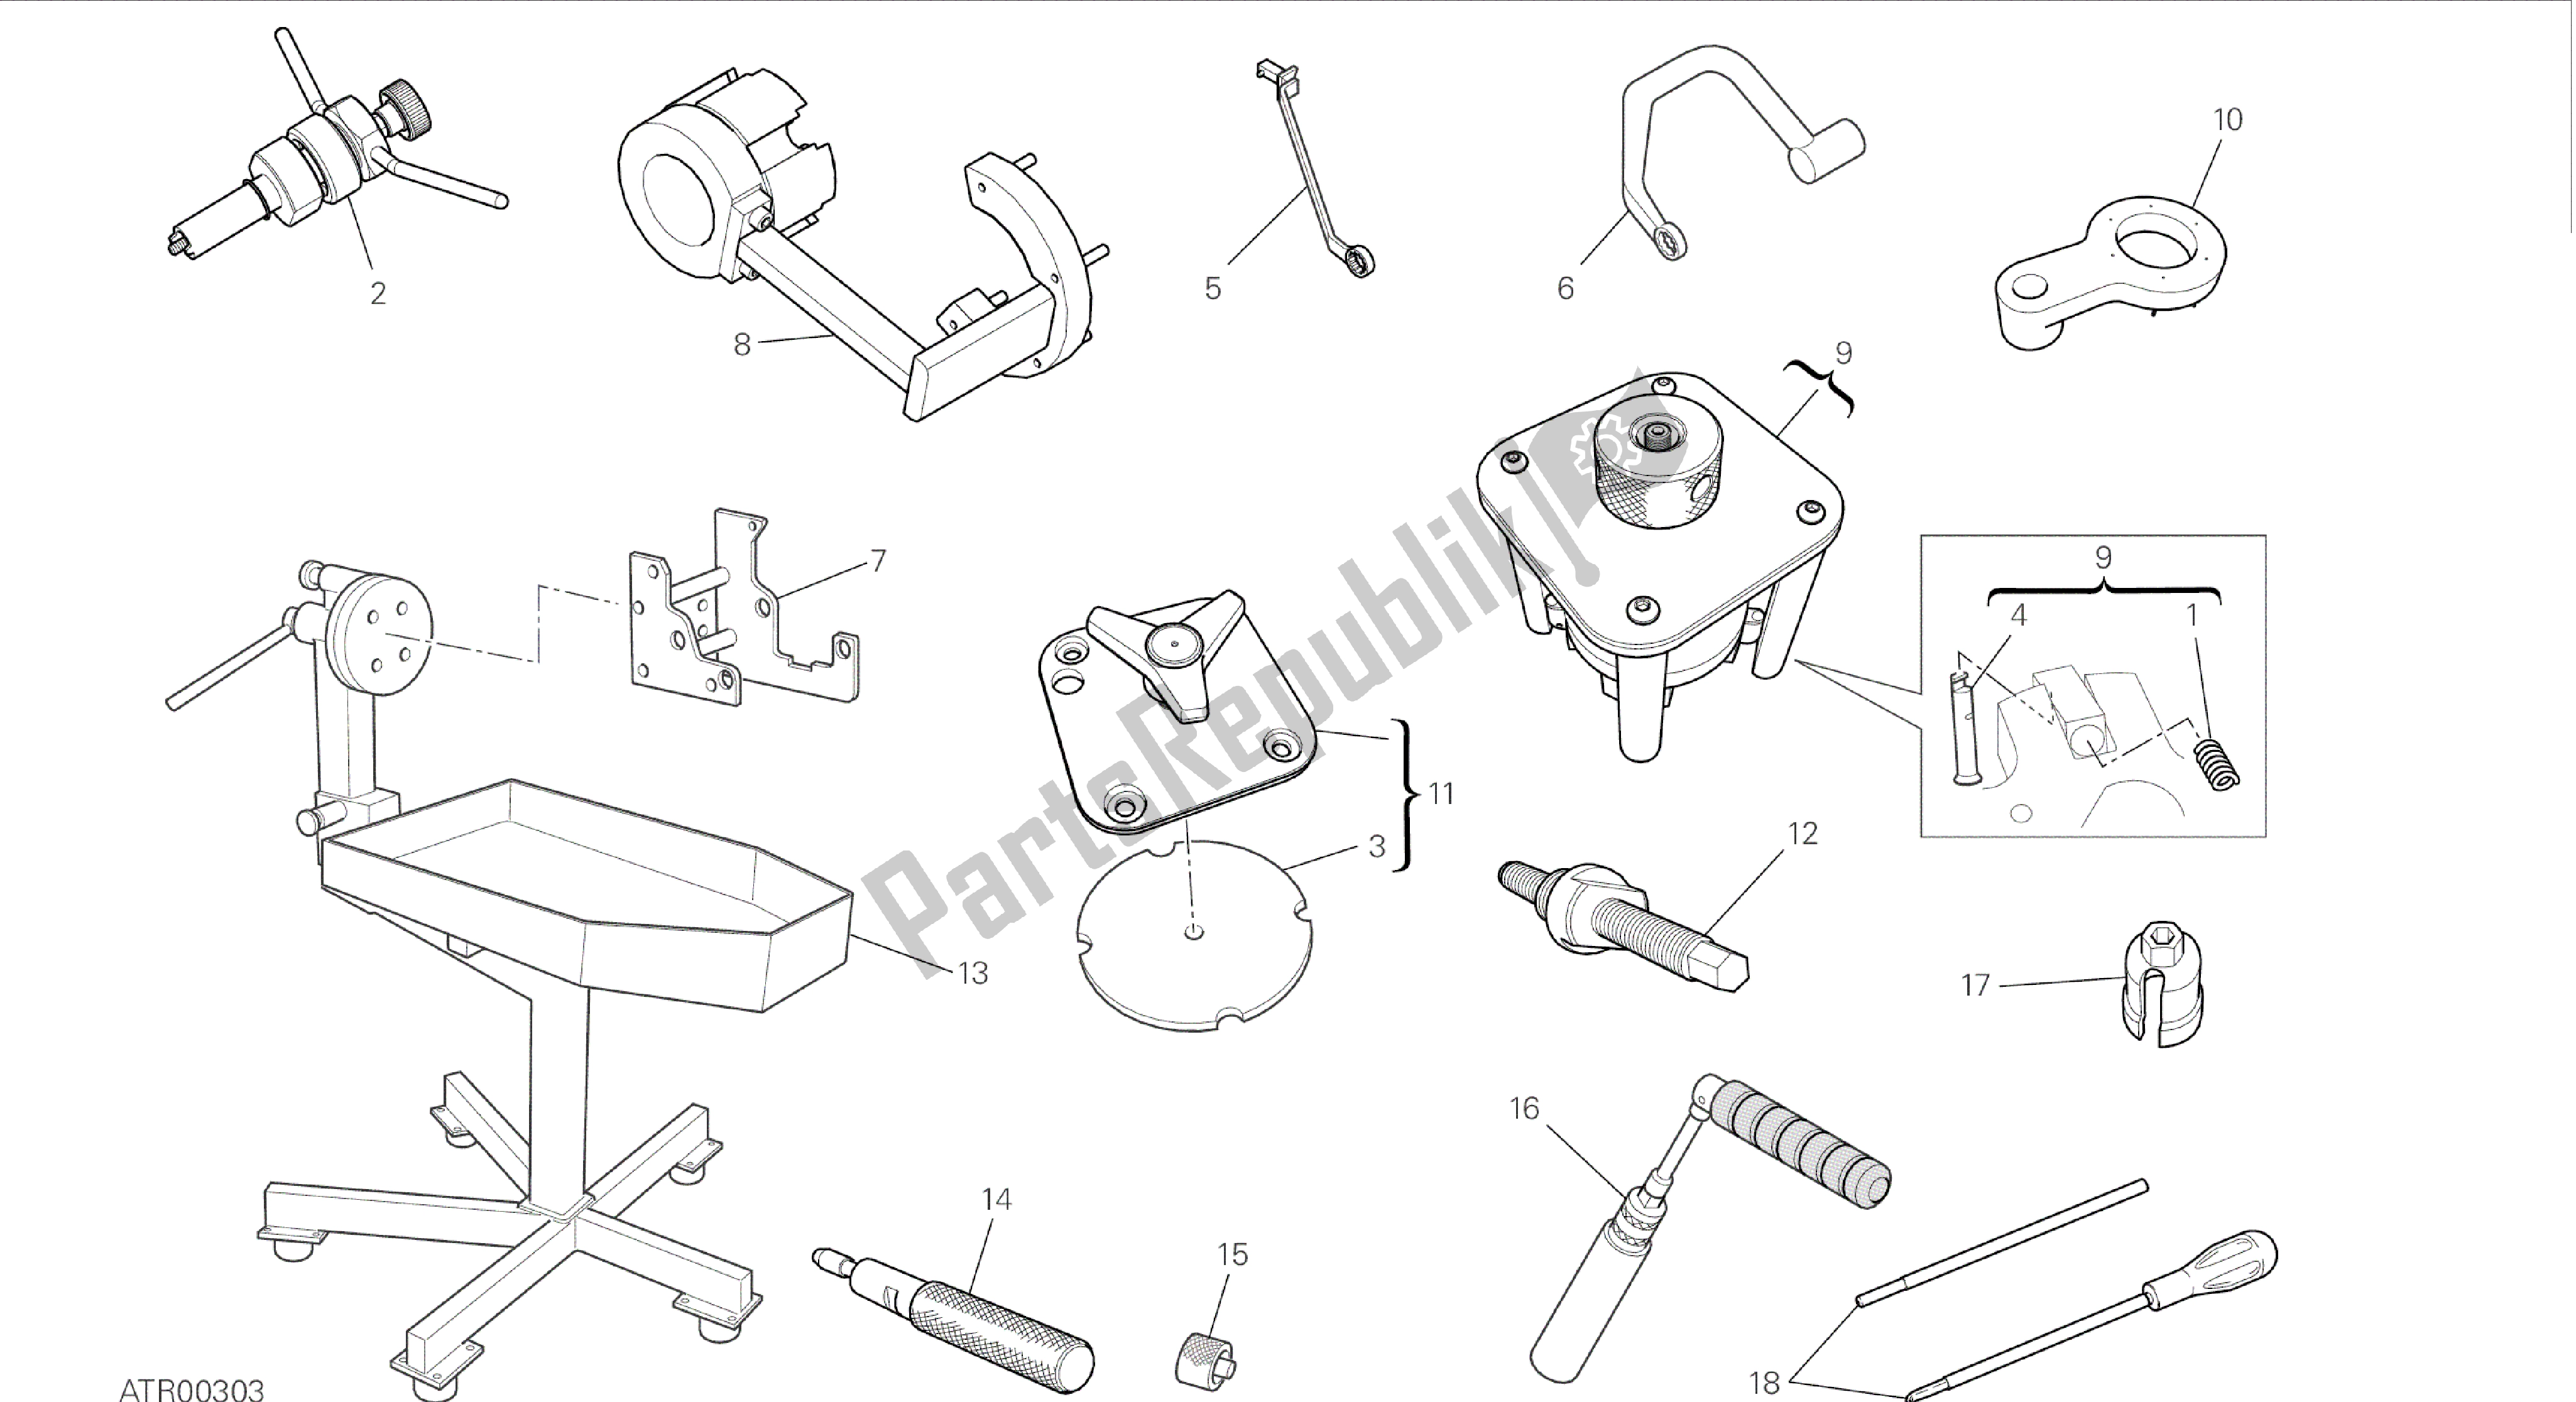 All parts for the Drawing 01b - Workshop Service Tools [mod:899 Abs,899 Aws]group Tools of the Ducati Panigale 899 2015